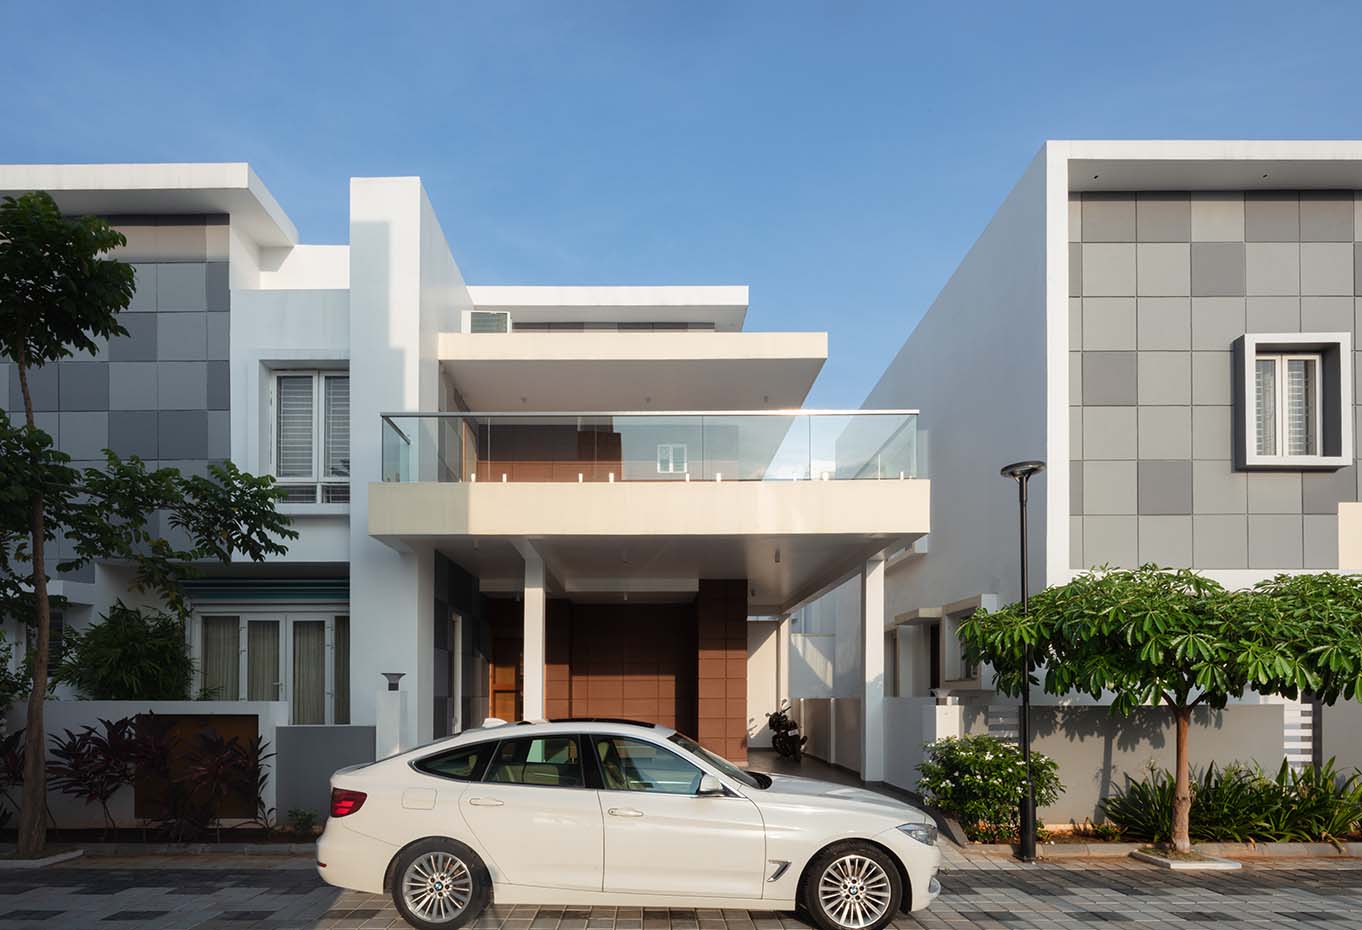 gallery image one - Green Field Housing India